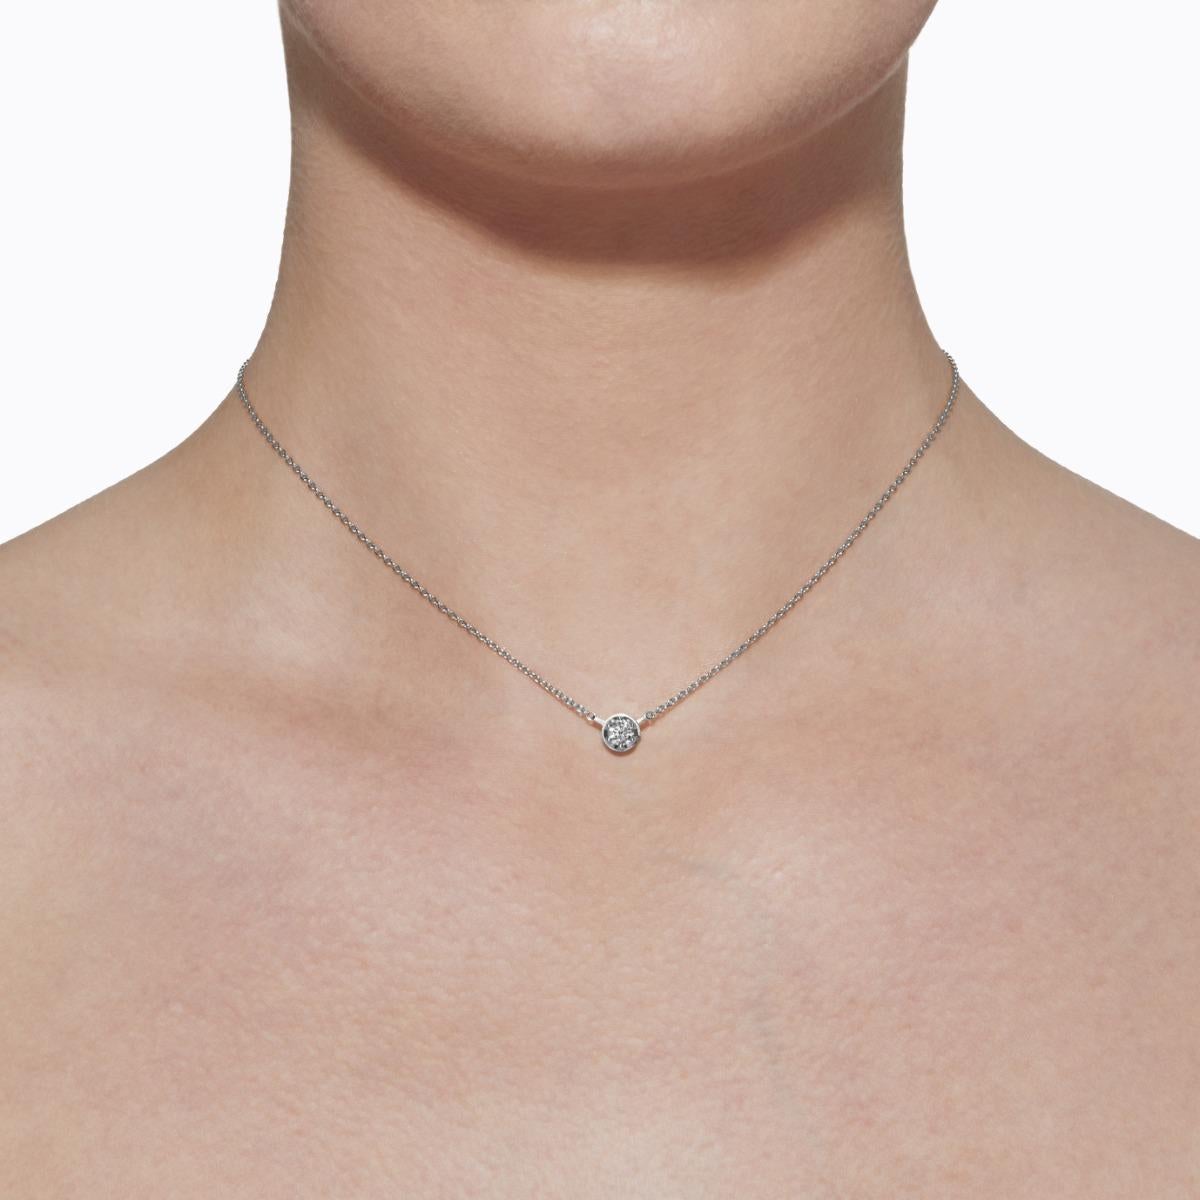 A single stone diamond necklace. Unlike traditional chain and pendant necklaces with a separate clasp, the diamond setting itself doubles as a hidden clasp, ensuring the stone is always featured in the front. Turn it horizontally 45 degrees to open